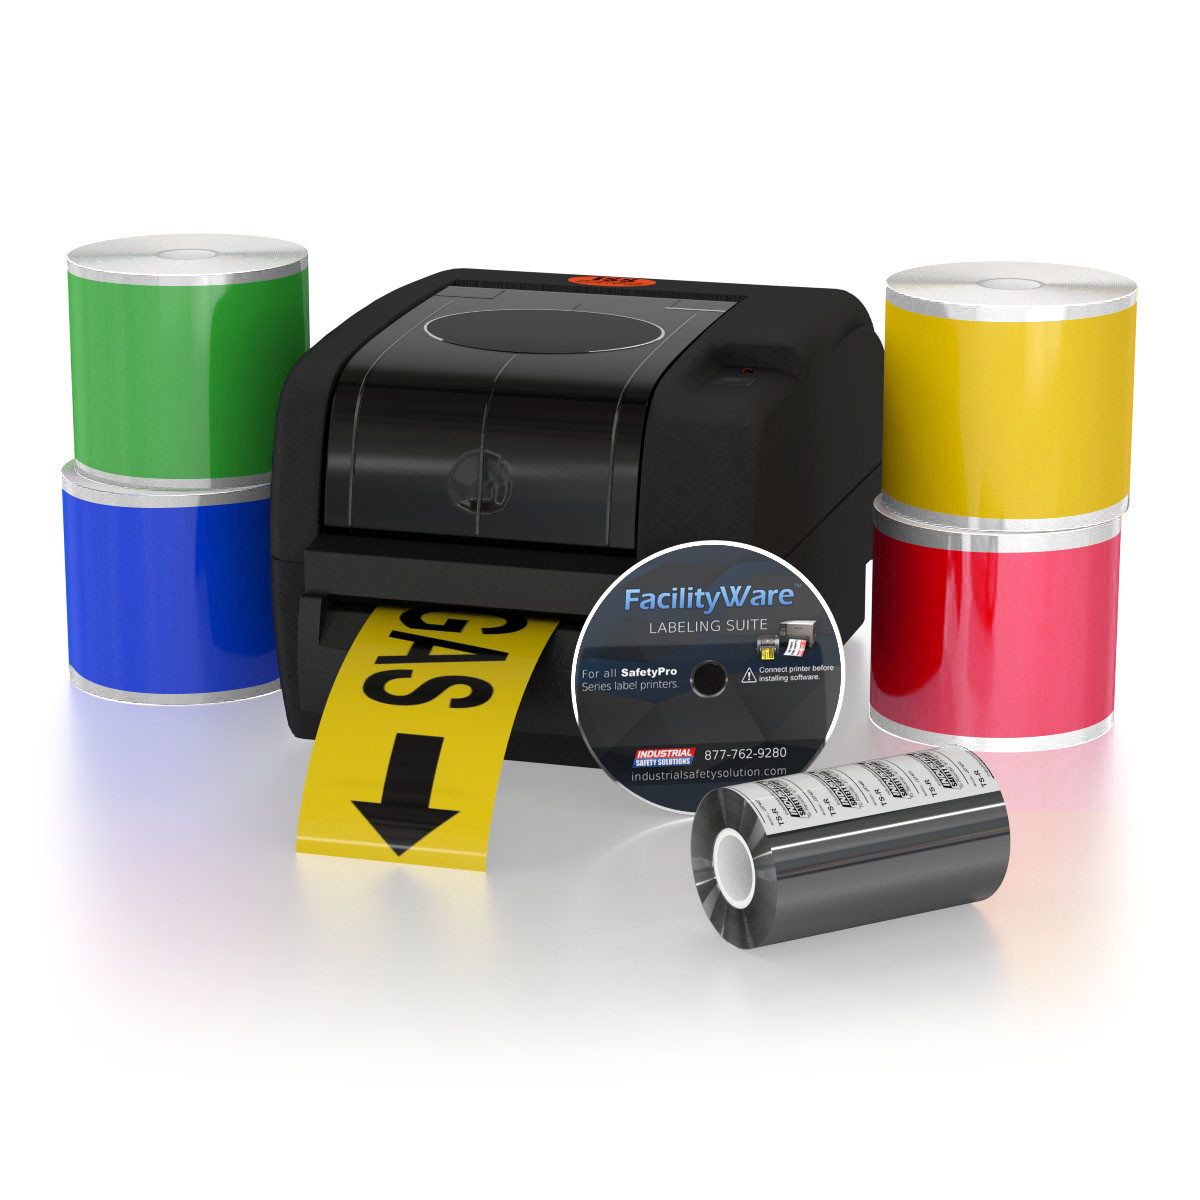 SafetyPro Industrial Label Printer with Easy Application Supplies